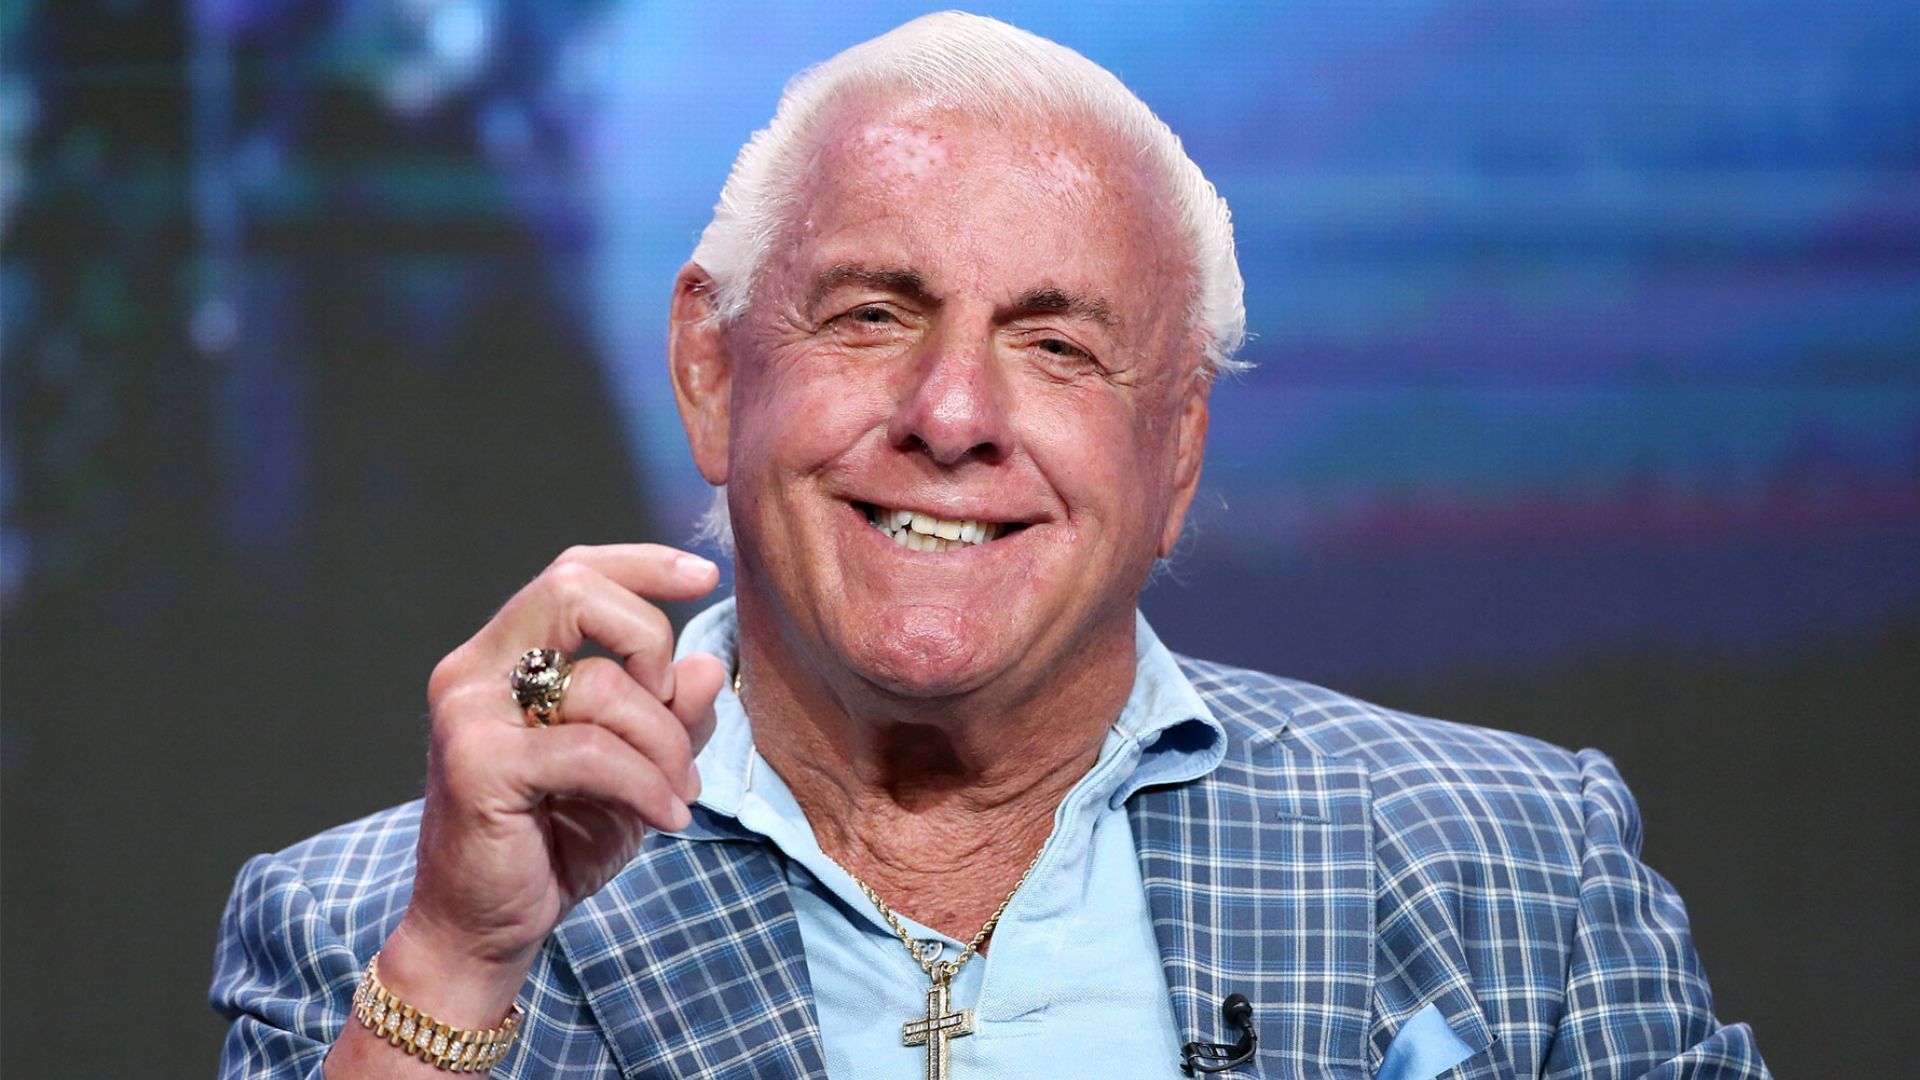 Flair is currently a part of All Elite Wrestling.